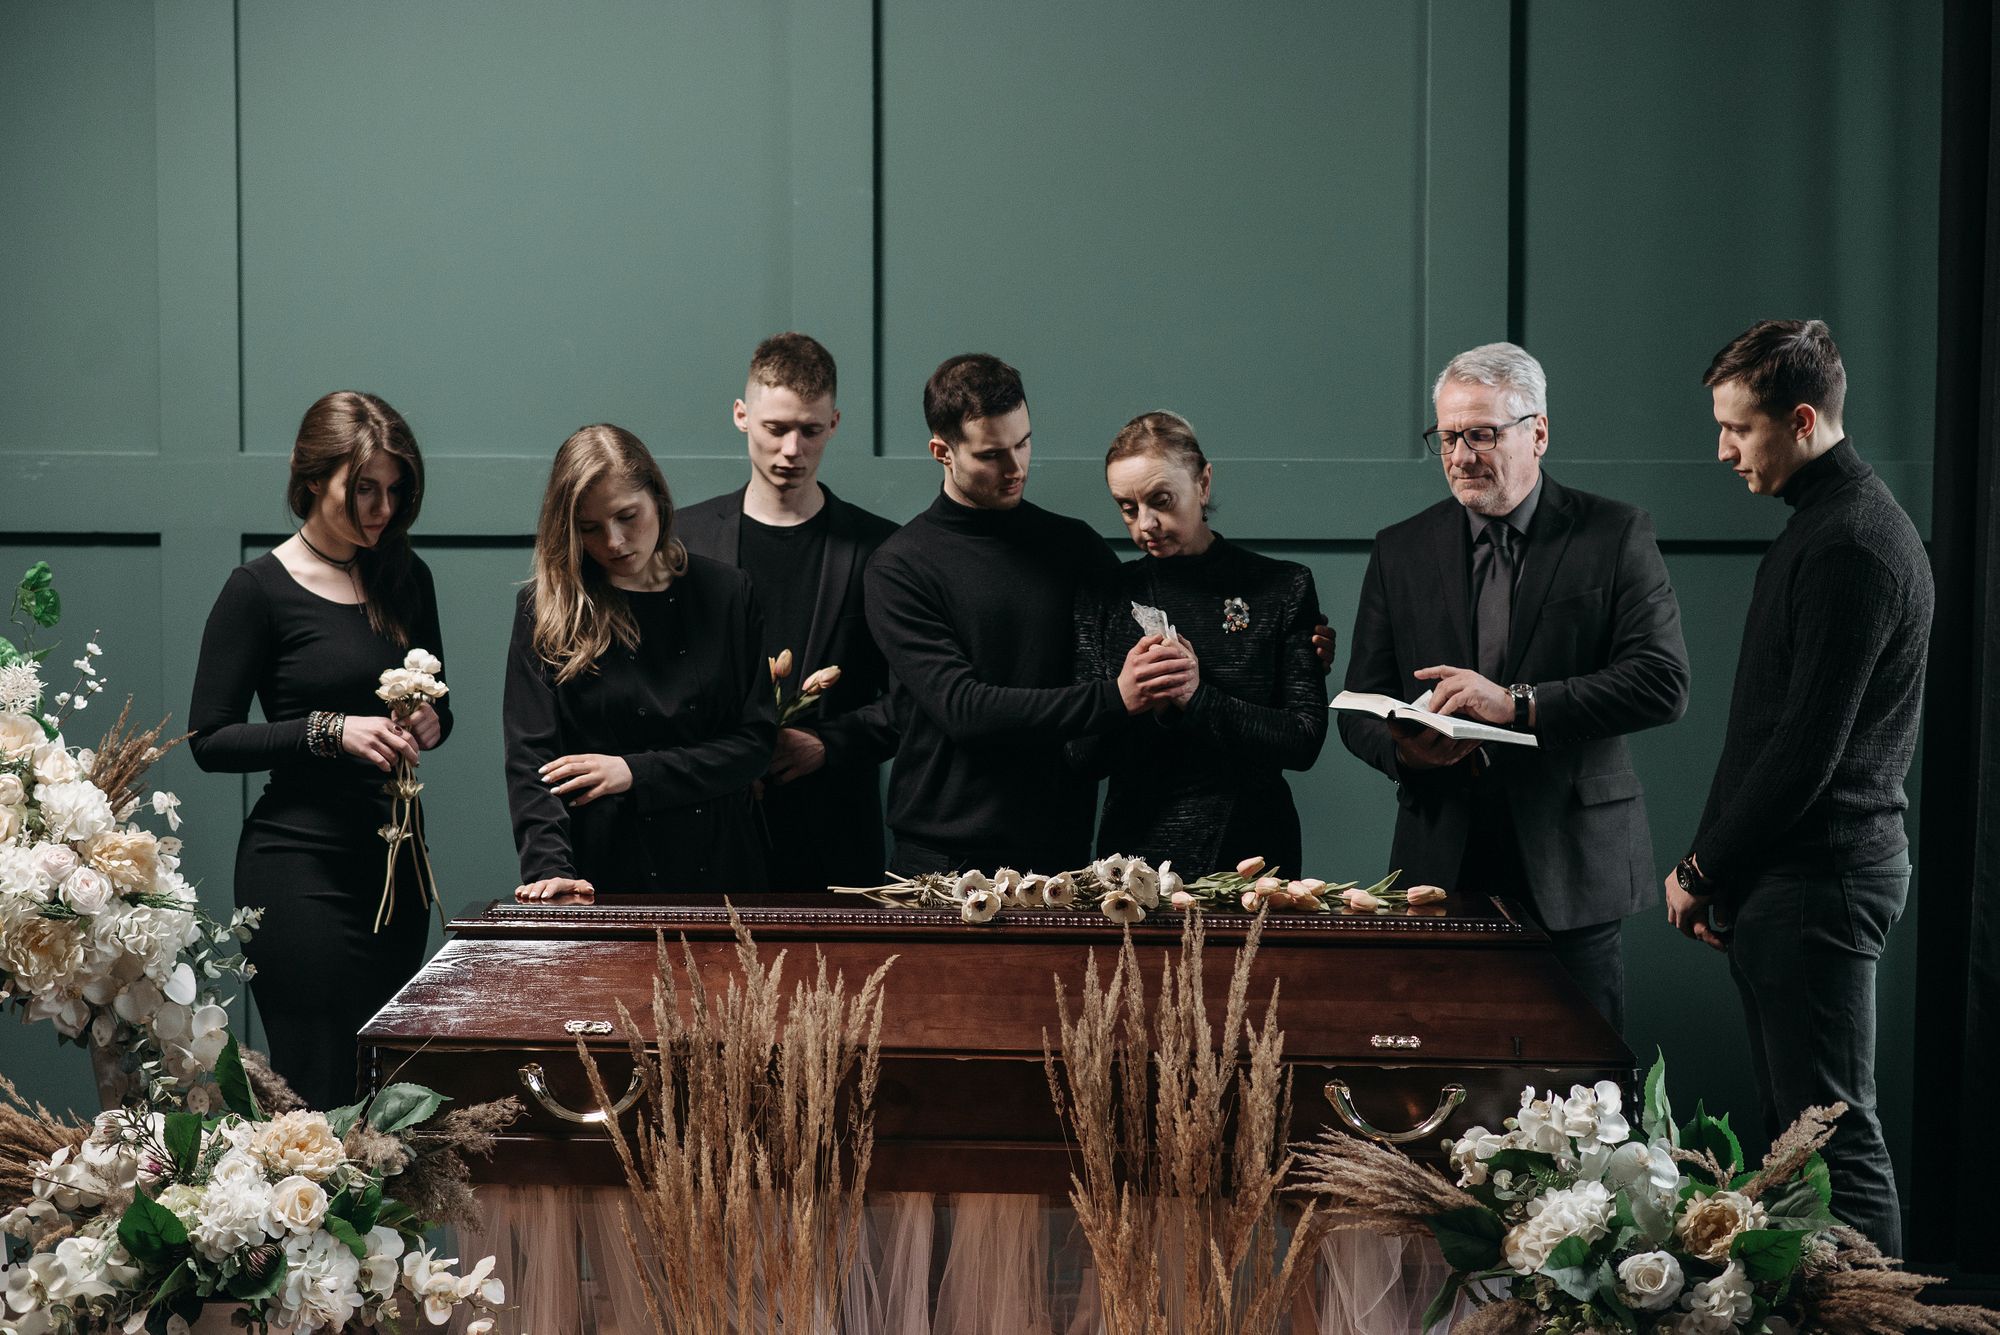 How Long After Death is a Funeral Held?